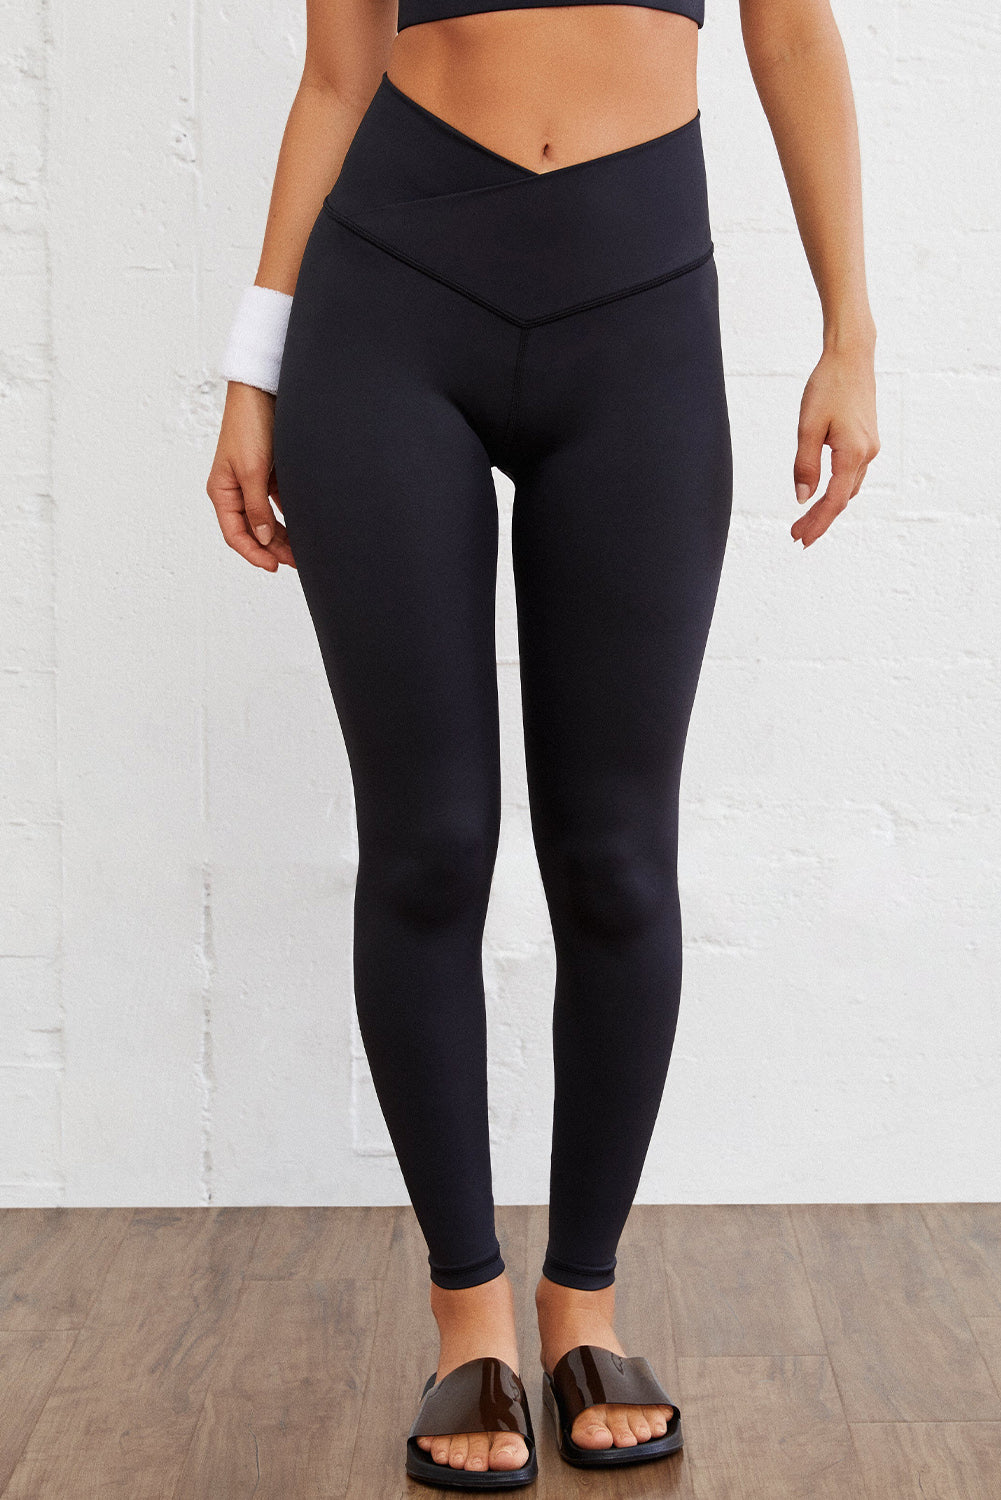 Arched Waist Seamless Leggings in Black